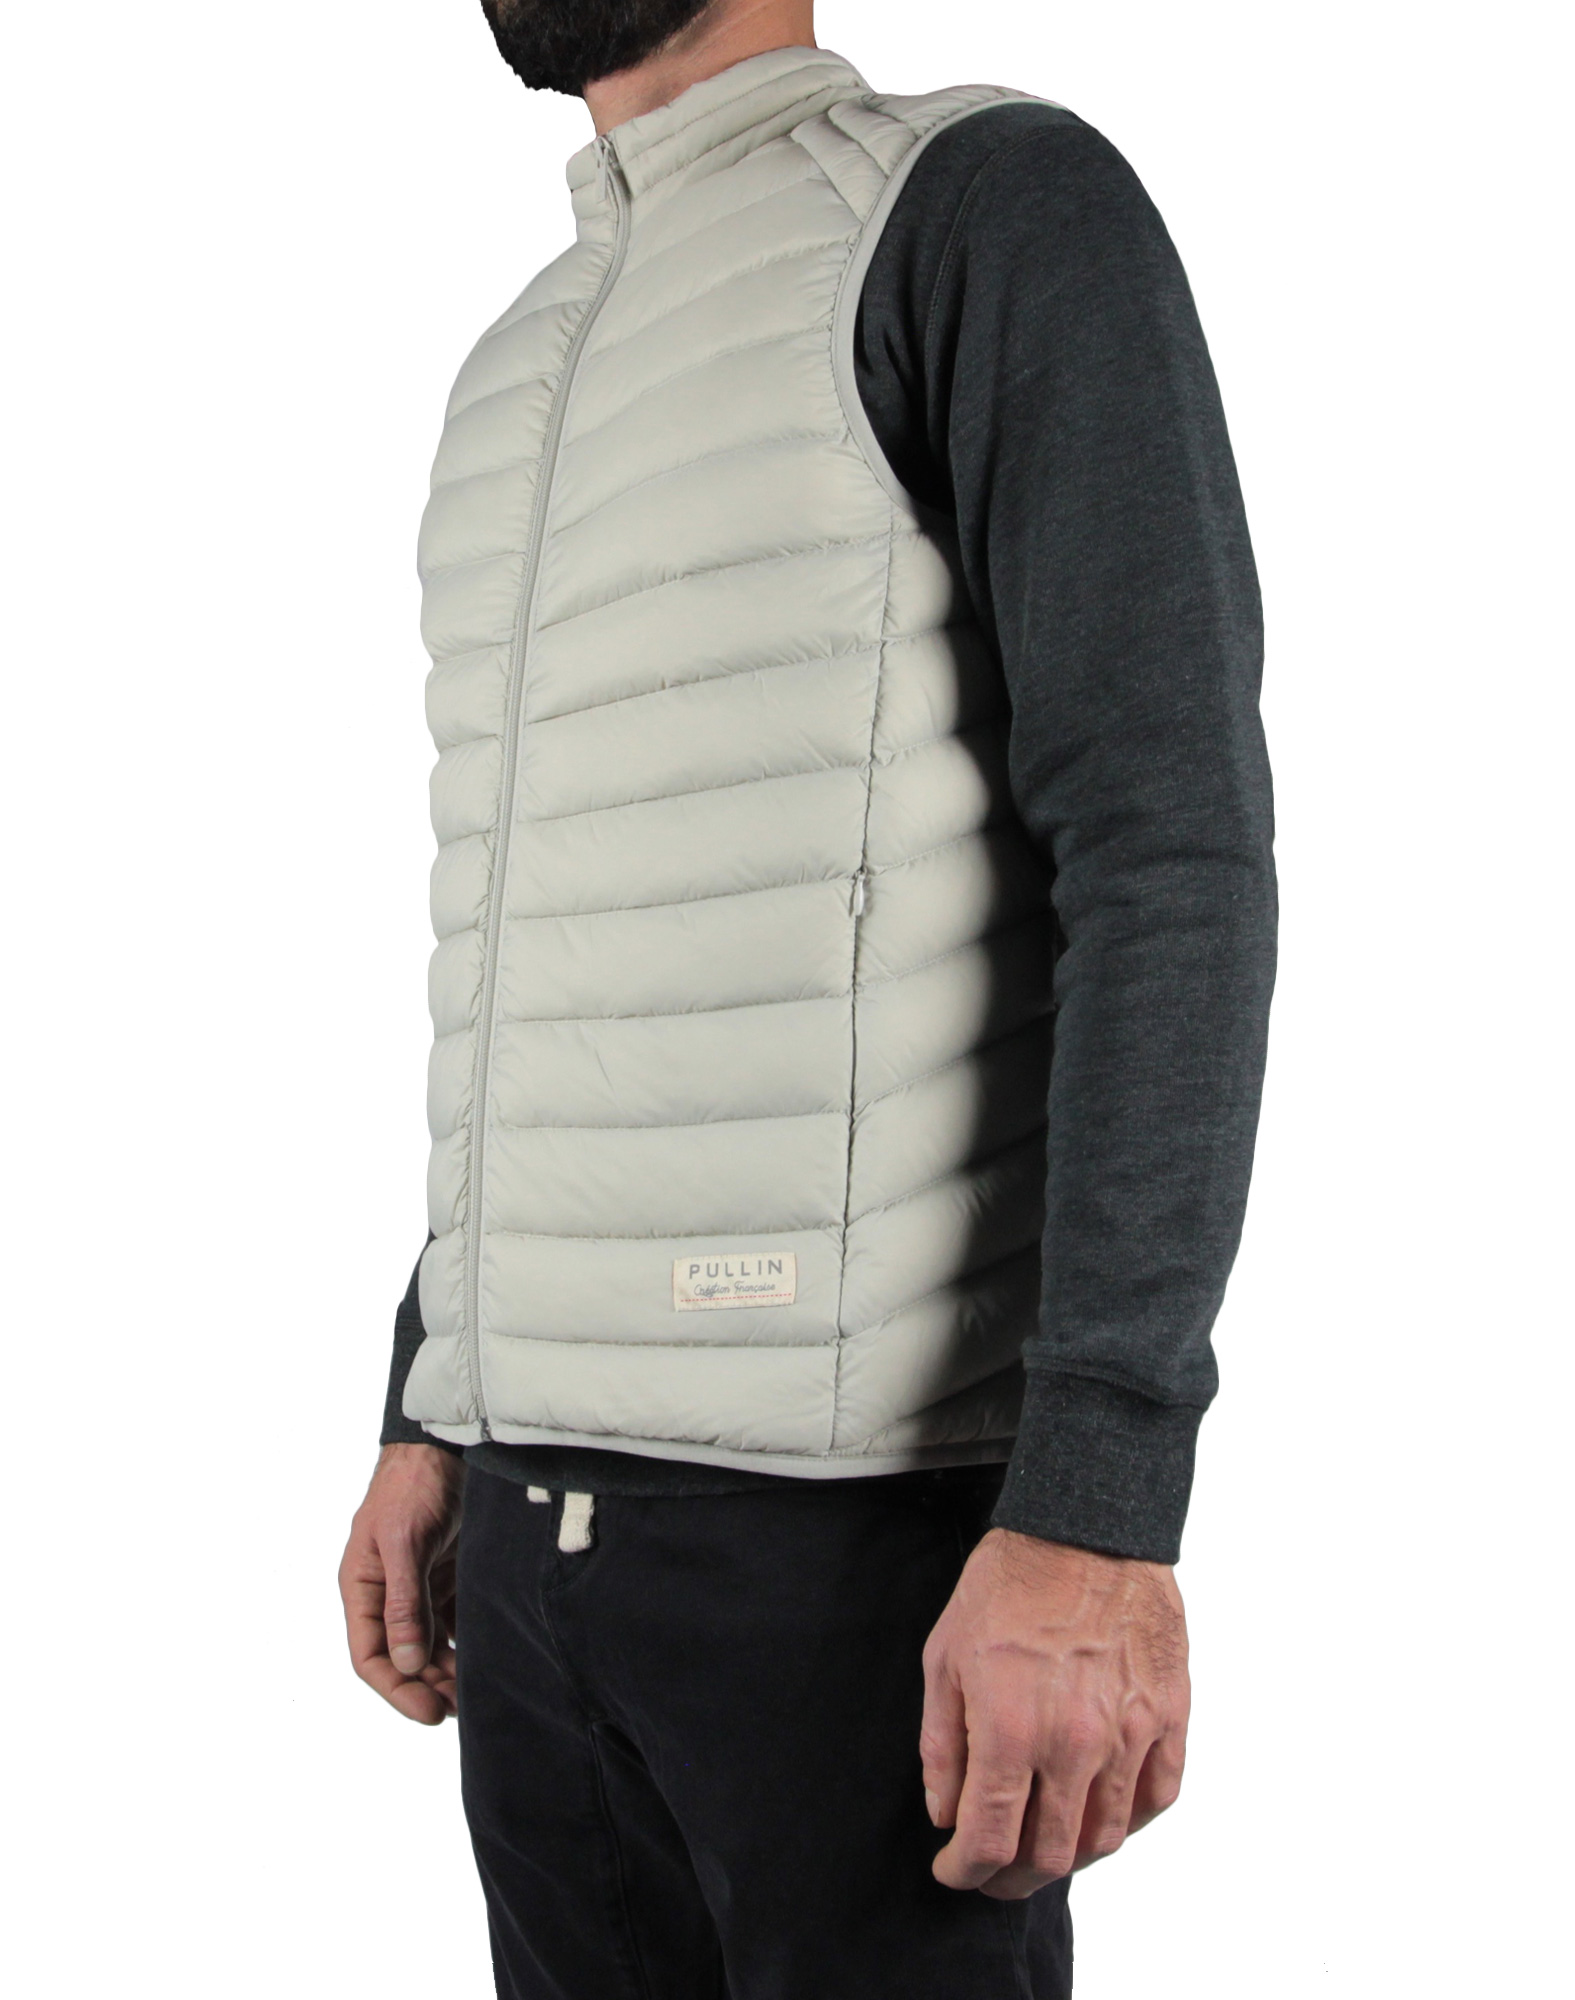 Men's feather jacket without sleeves SOCAL